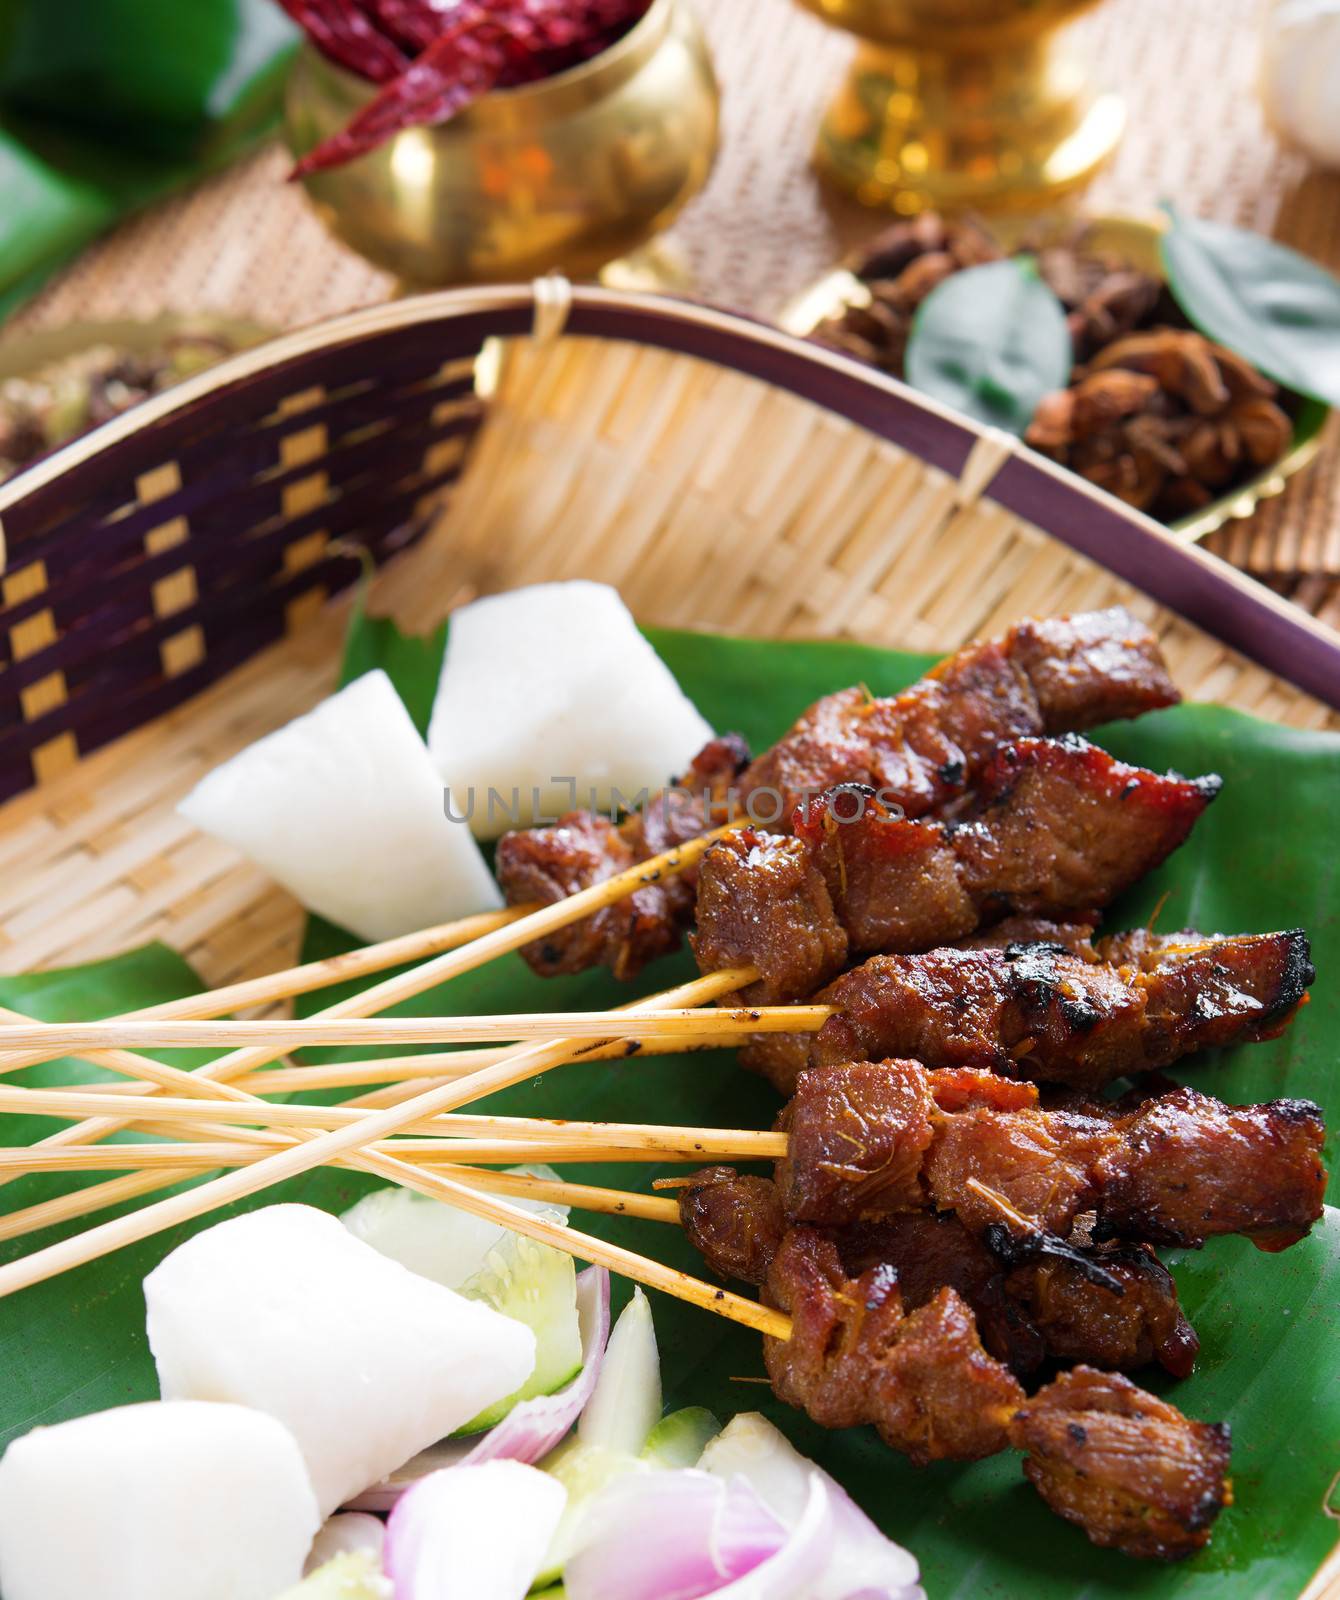 Beef satay, roasted meat skewer Malay food. Traditional Malaysia food. Hot and spicy Malaysian dish, Asian cuisine.